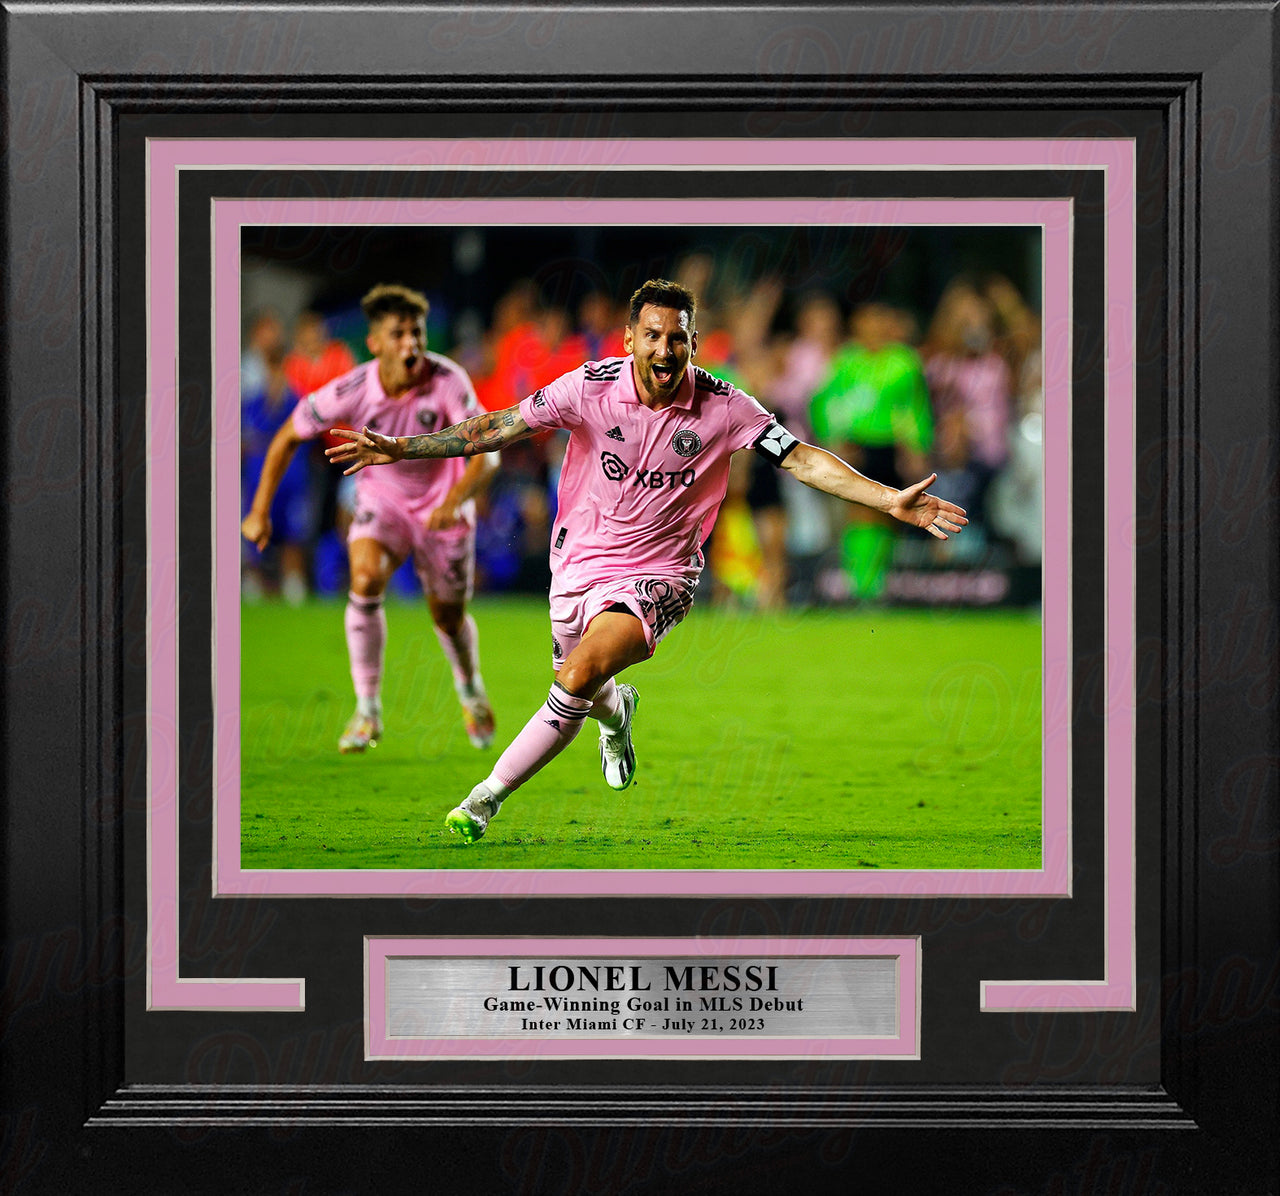 Lionel Messi Game-Winning Goal in MLS Debut Inter Miami CF 8x10 Framed Soccer Photo